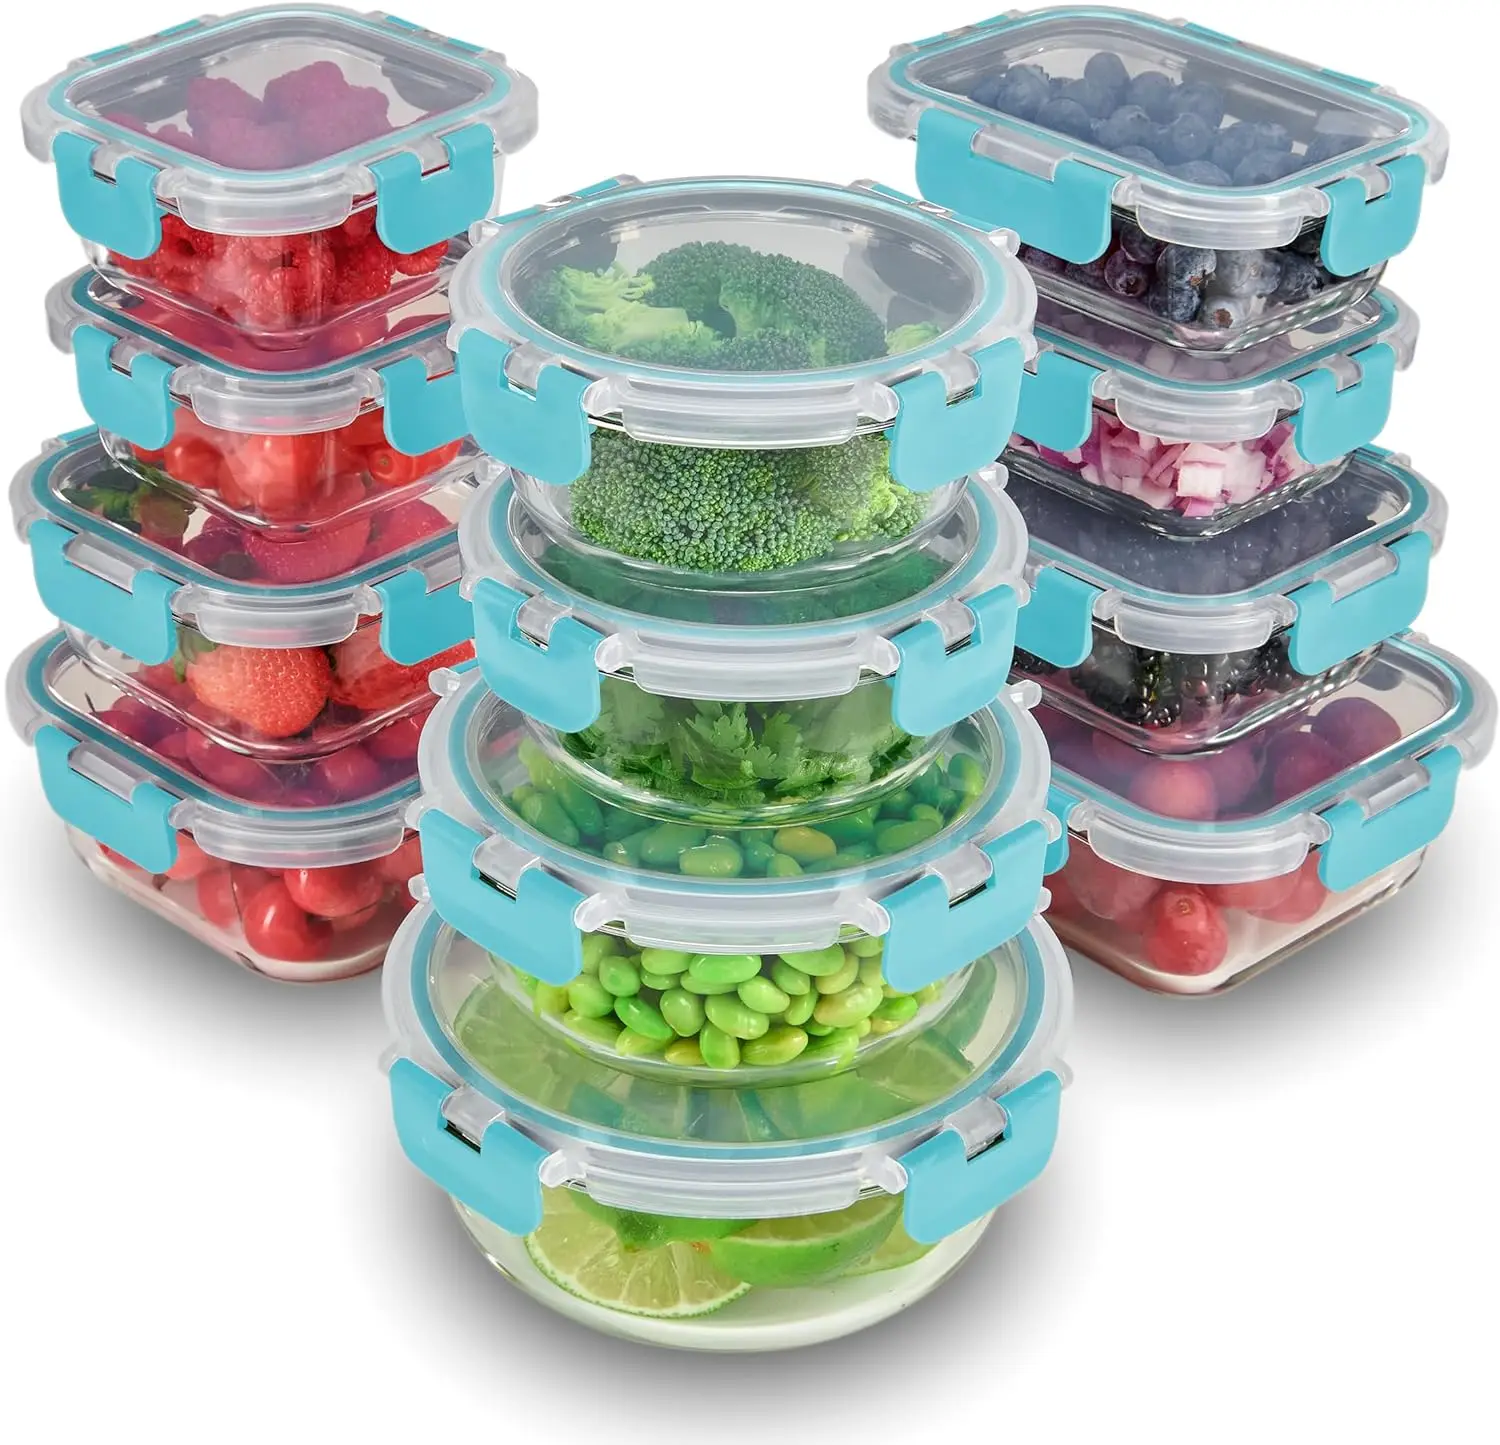 

24 Piece Glass Storage Containers with Lids - Leak Proof, Dishwasher Safe Glass Food Storage Containers